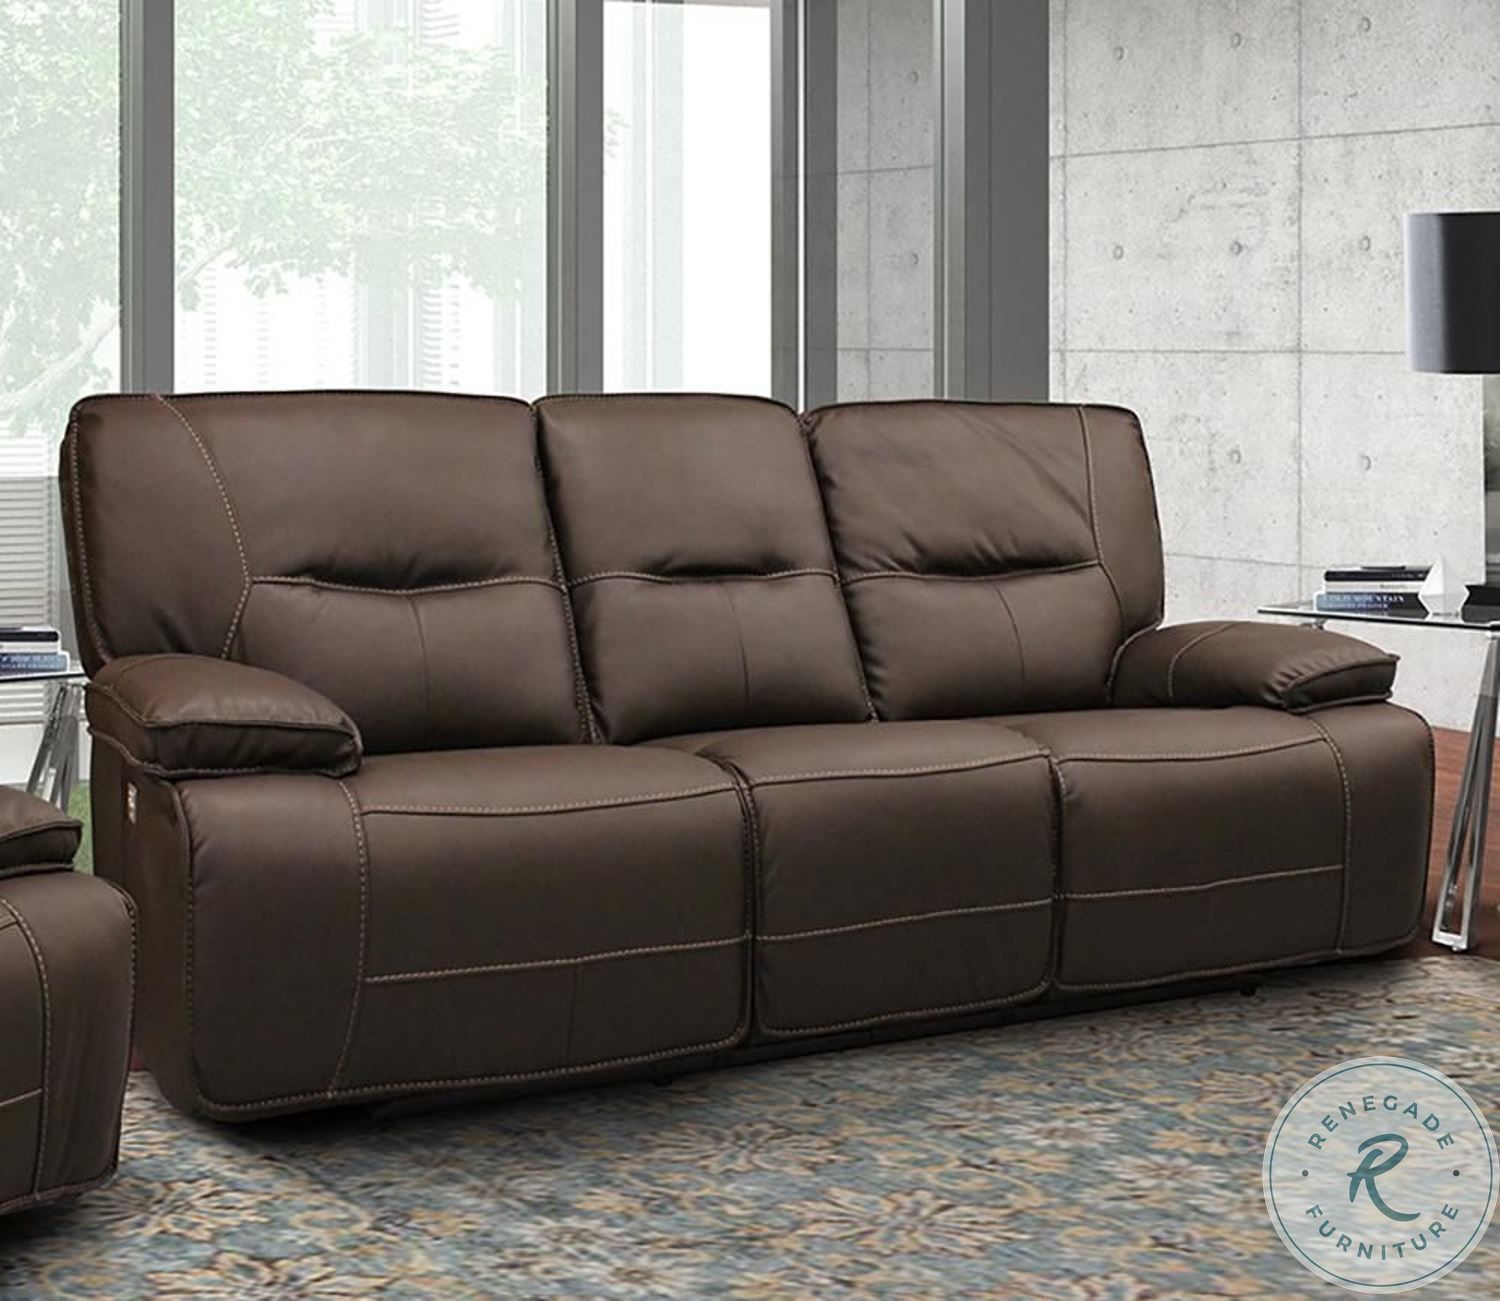 Spartacus Chocolate Dual Power Reclining Living Room Set